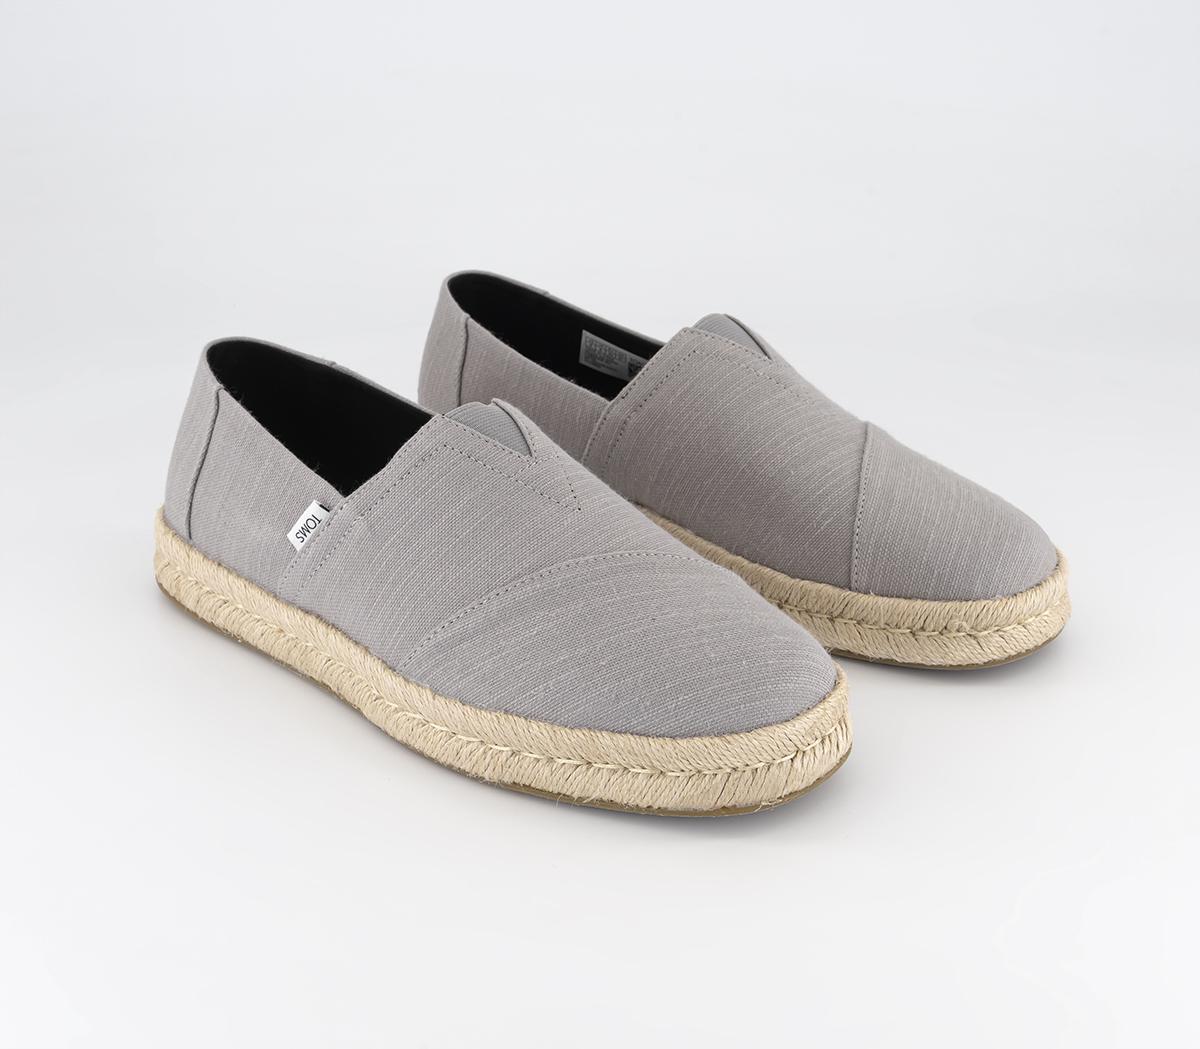 TOMS Mens Alpargata Rope 2.0 Slip Ons Drizzle Grey Recycled Cotton Slubby Woven, 11